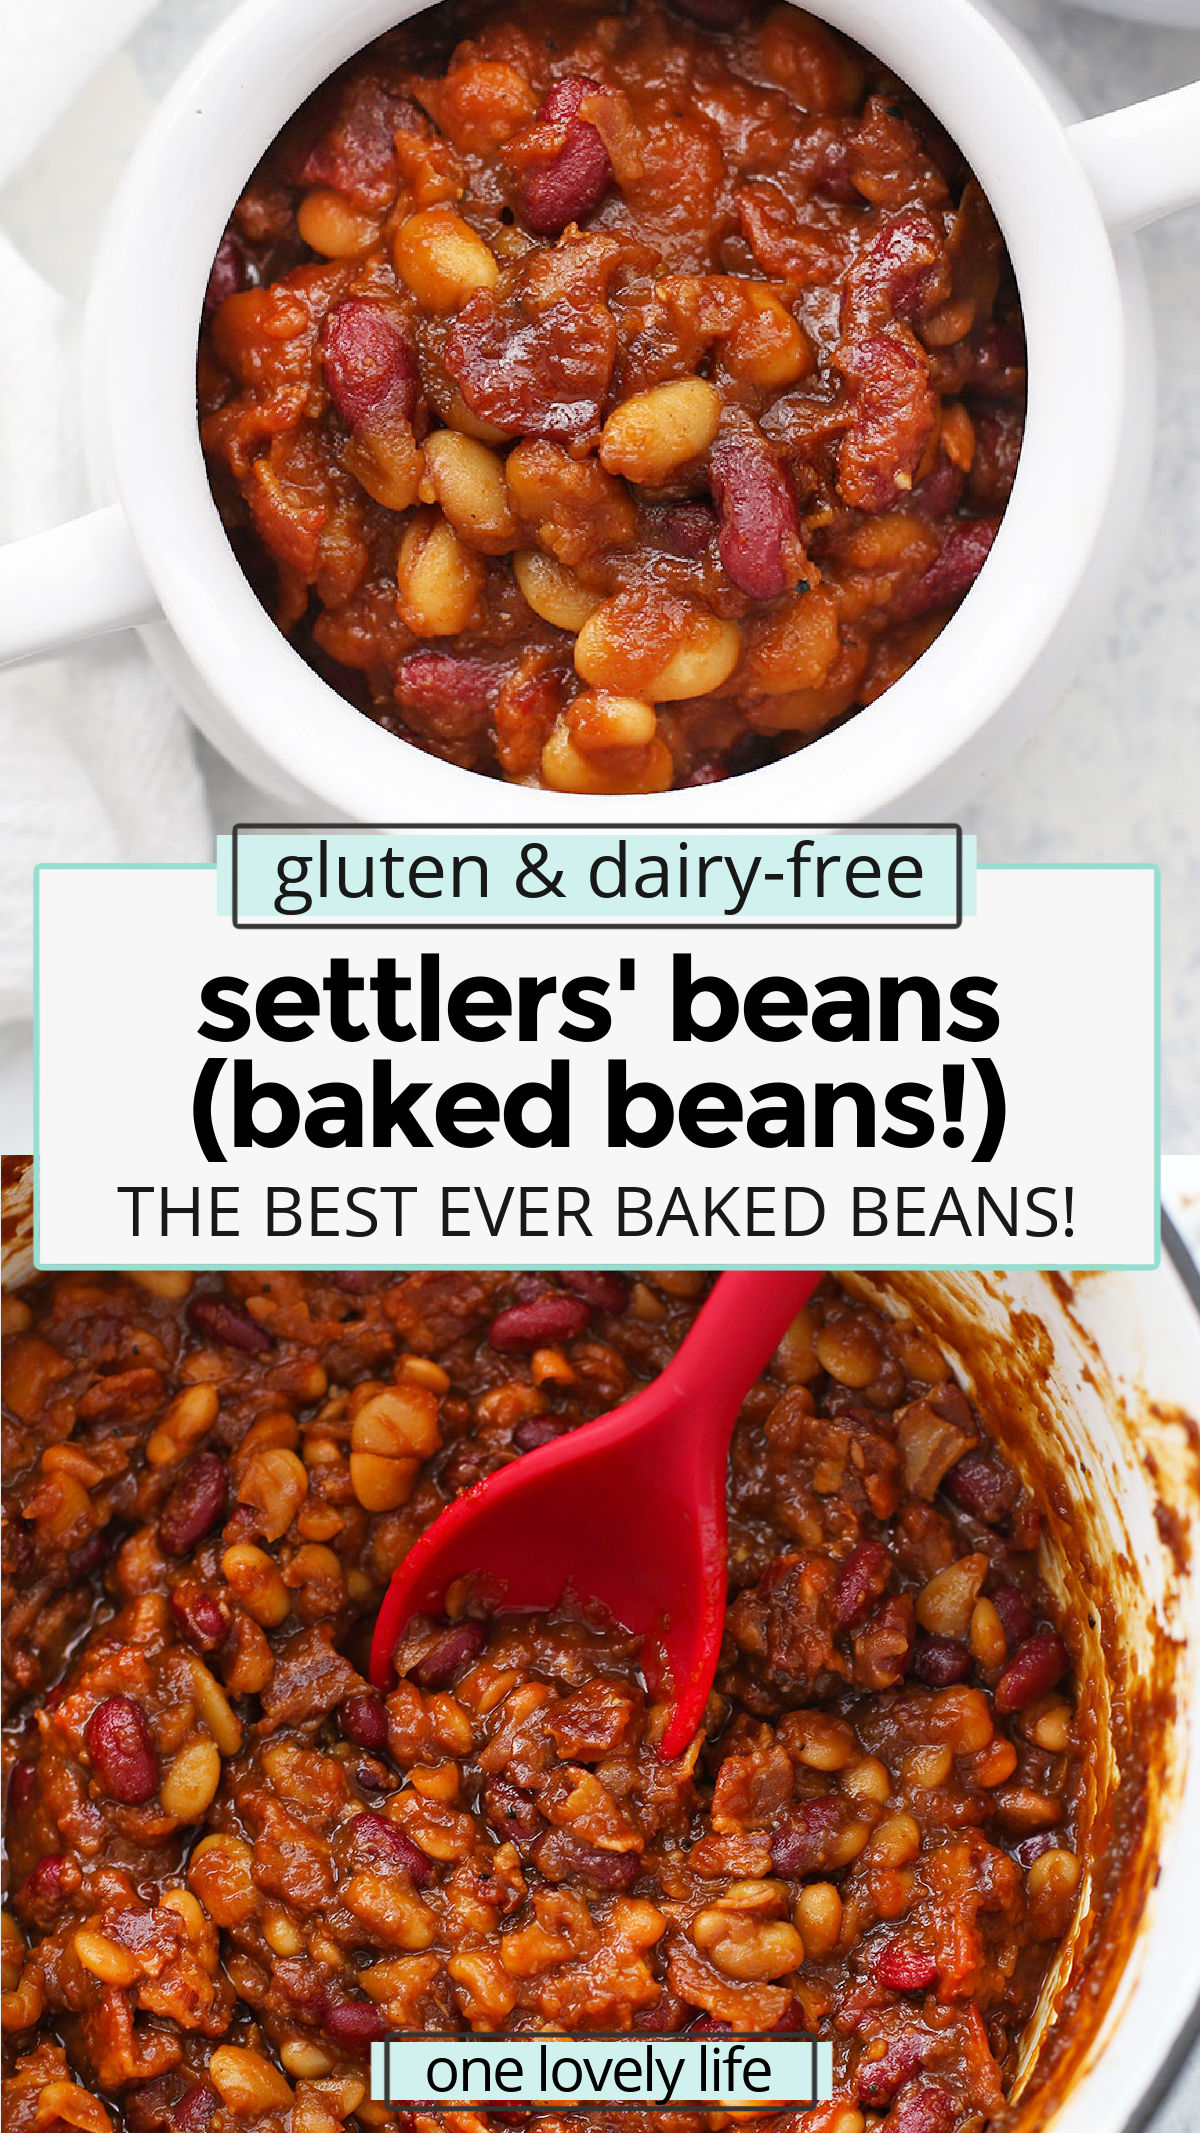 Settlers Beans - This recipe uses a flavorful base and a secret sauce to make them the BEST baked beans ever! (Gluten free, dairy free) // Old settlers beans recipe // bacon baked beans recipe // easy baked beans recipe // gluten free baked beans recipe // the best baked beans recipe // settlers baked beans // old settlers baked beans recipe // summer side dish // bbq beans // summer potluck recipe // side dish recipe